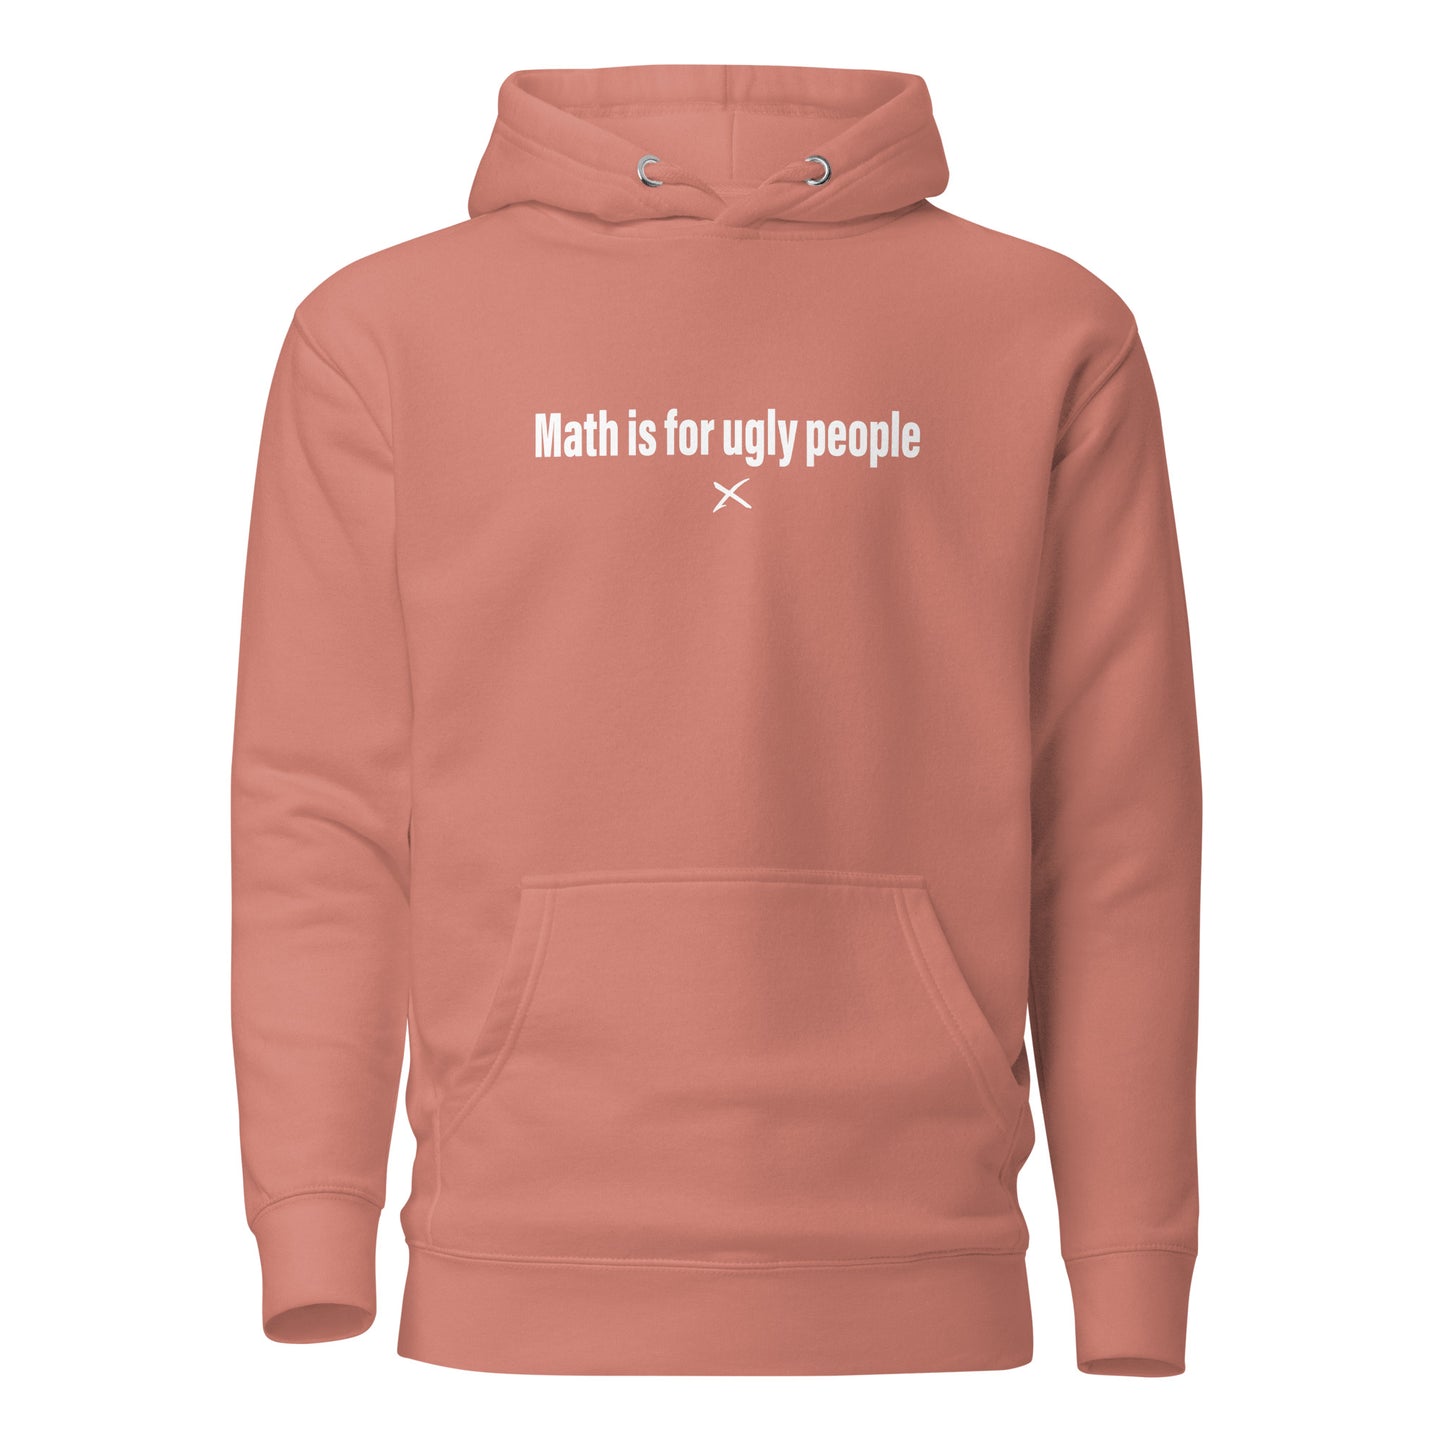 Math is for ugly people - Hoodie